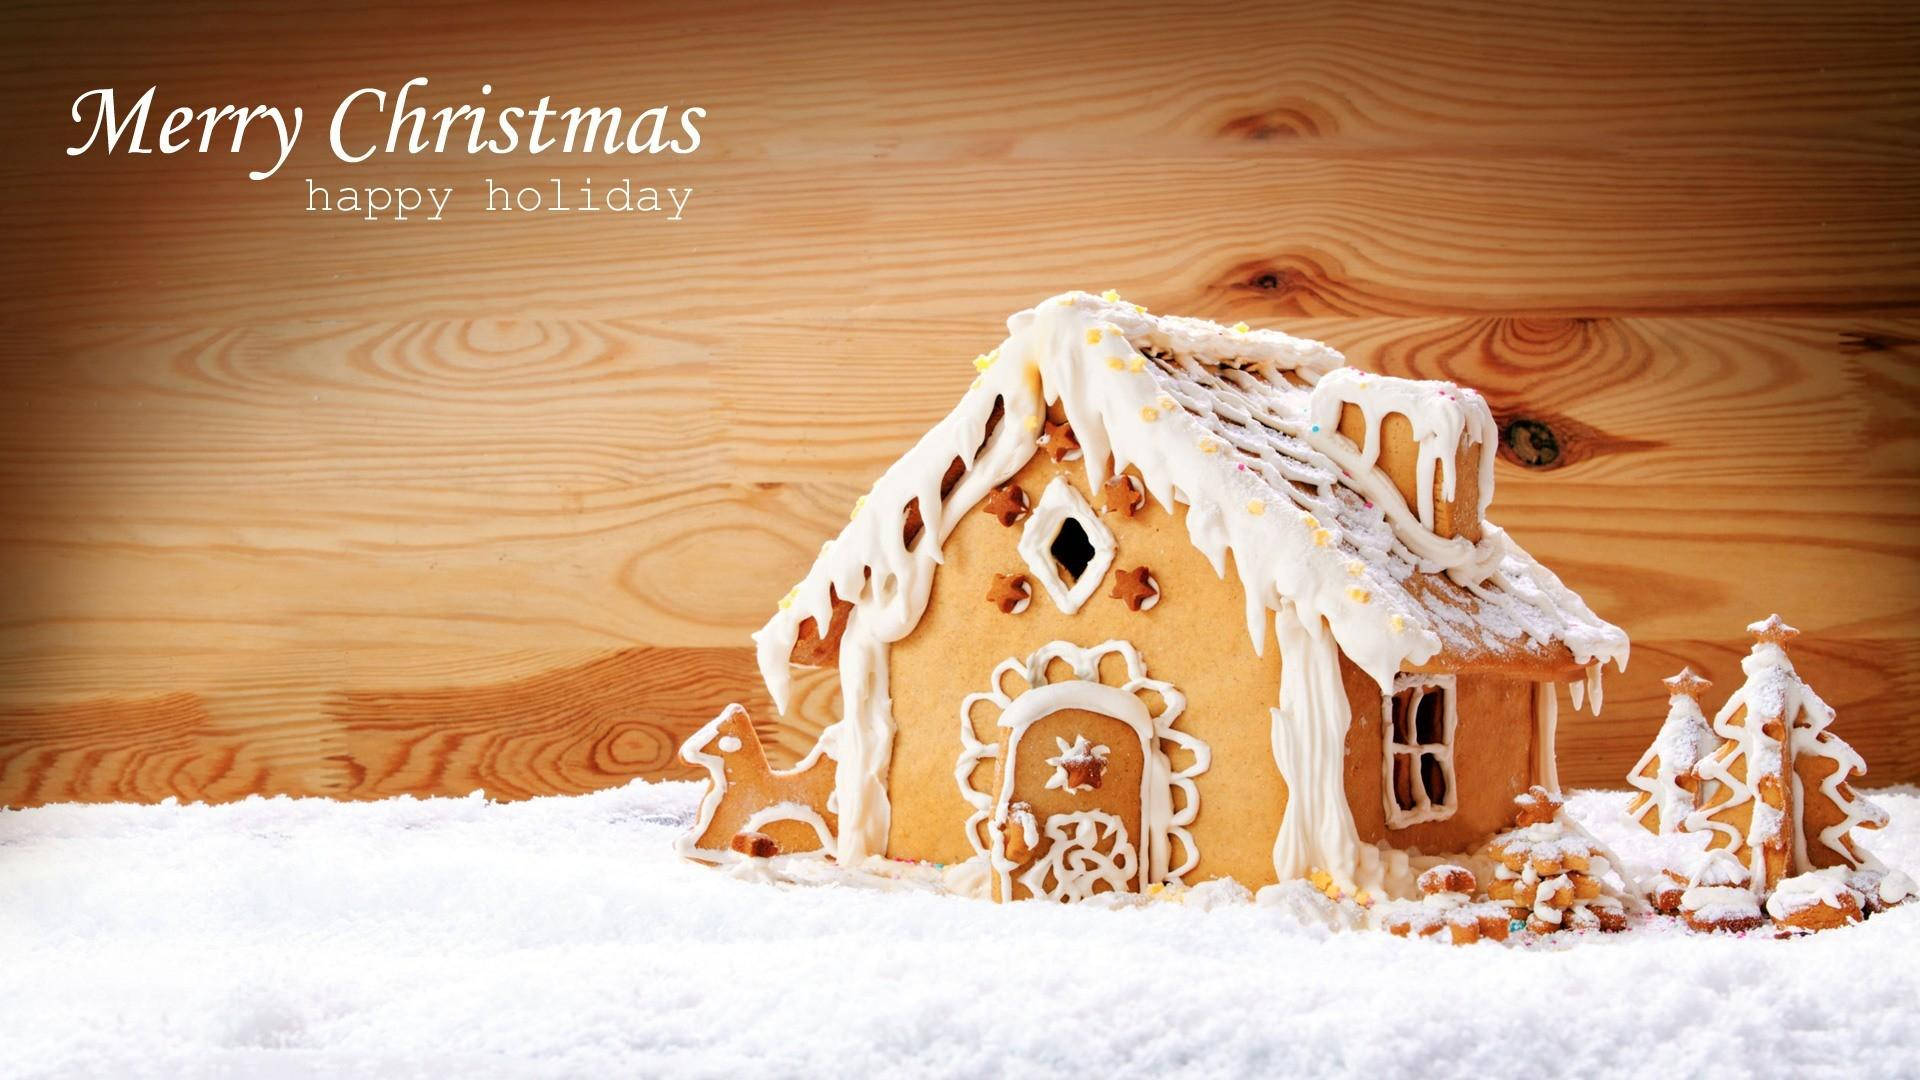 Happy Holidays Gingerbread House Poster Wallpaper